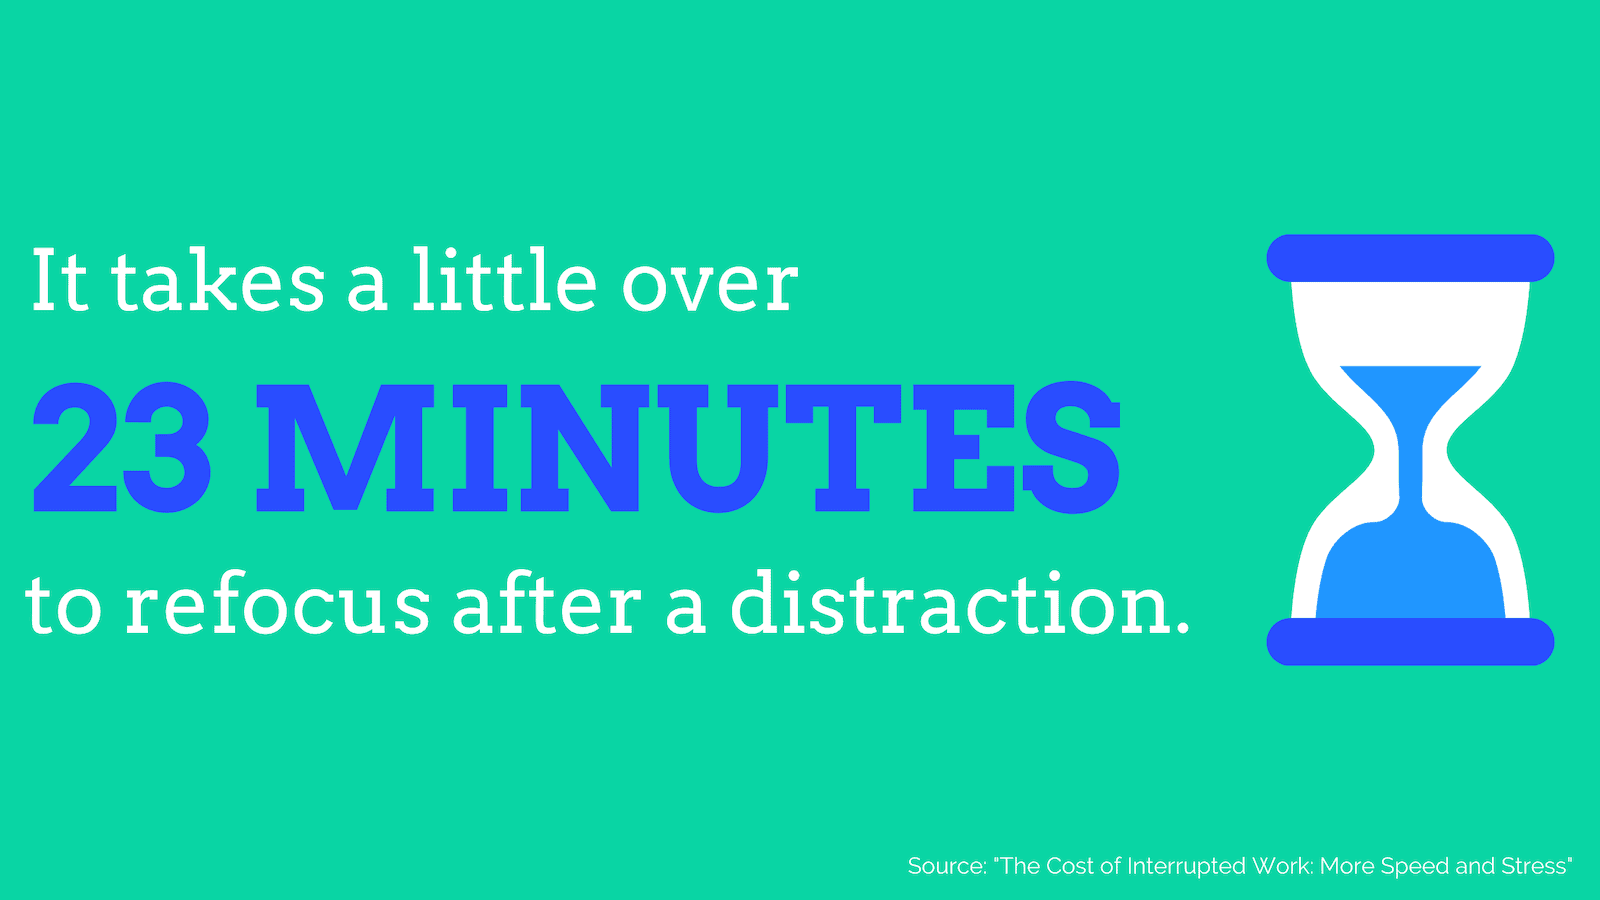 It takes a little over 23 minutes to refocus after a distraction.